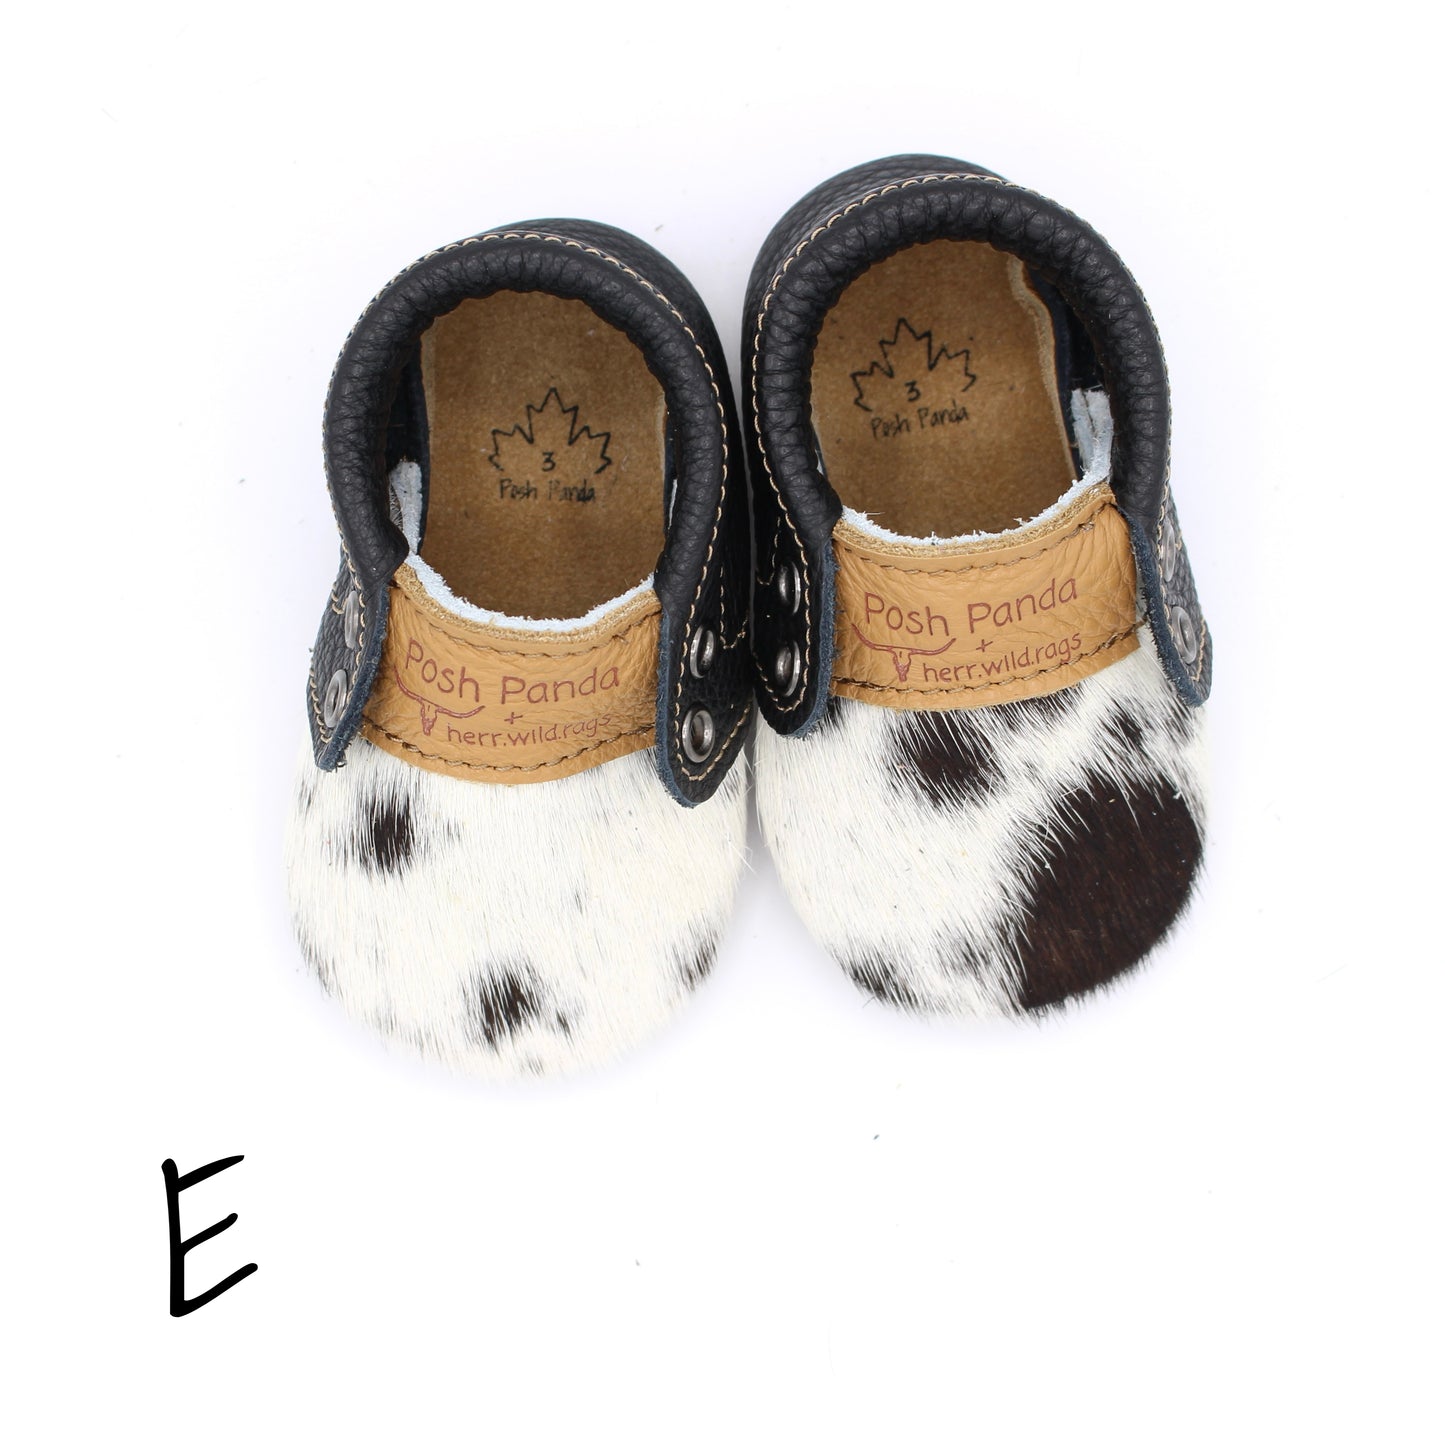 Hair Hide Mocs -  BABY/TODDLER (Soft Sole) - Size 3